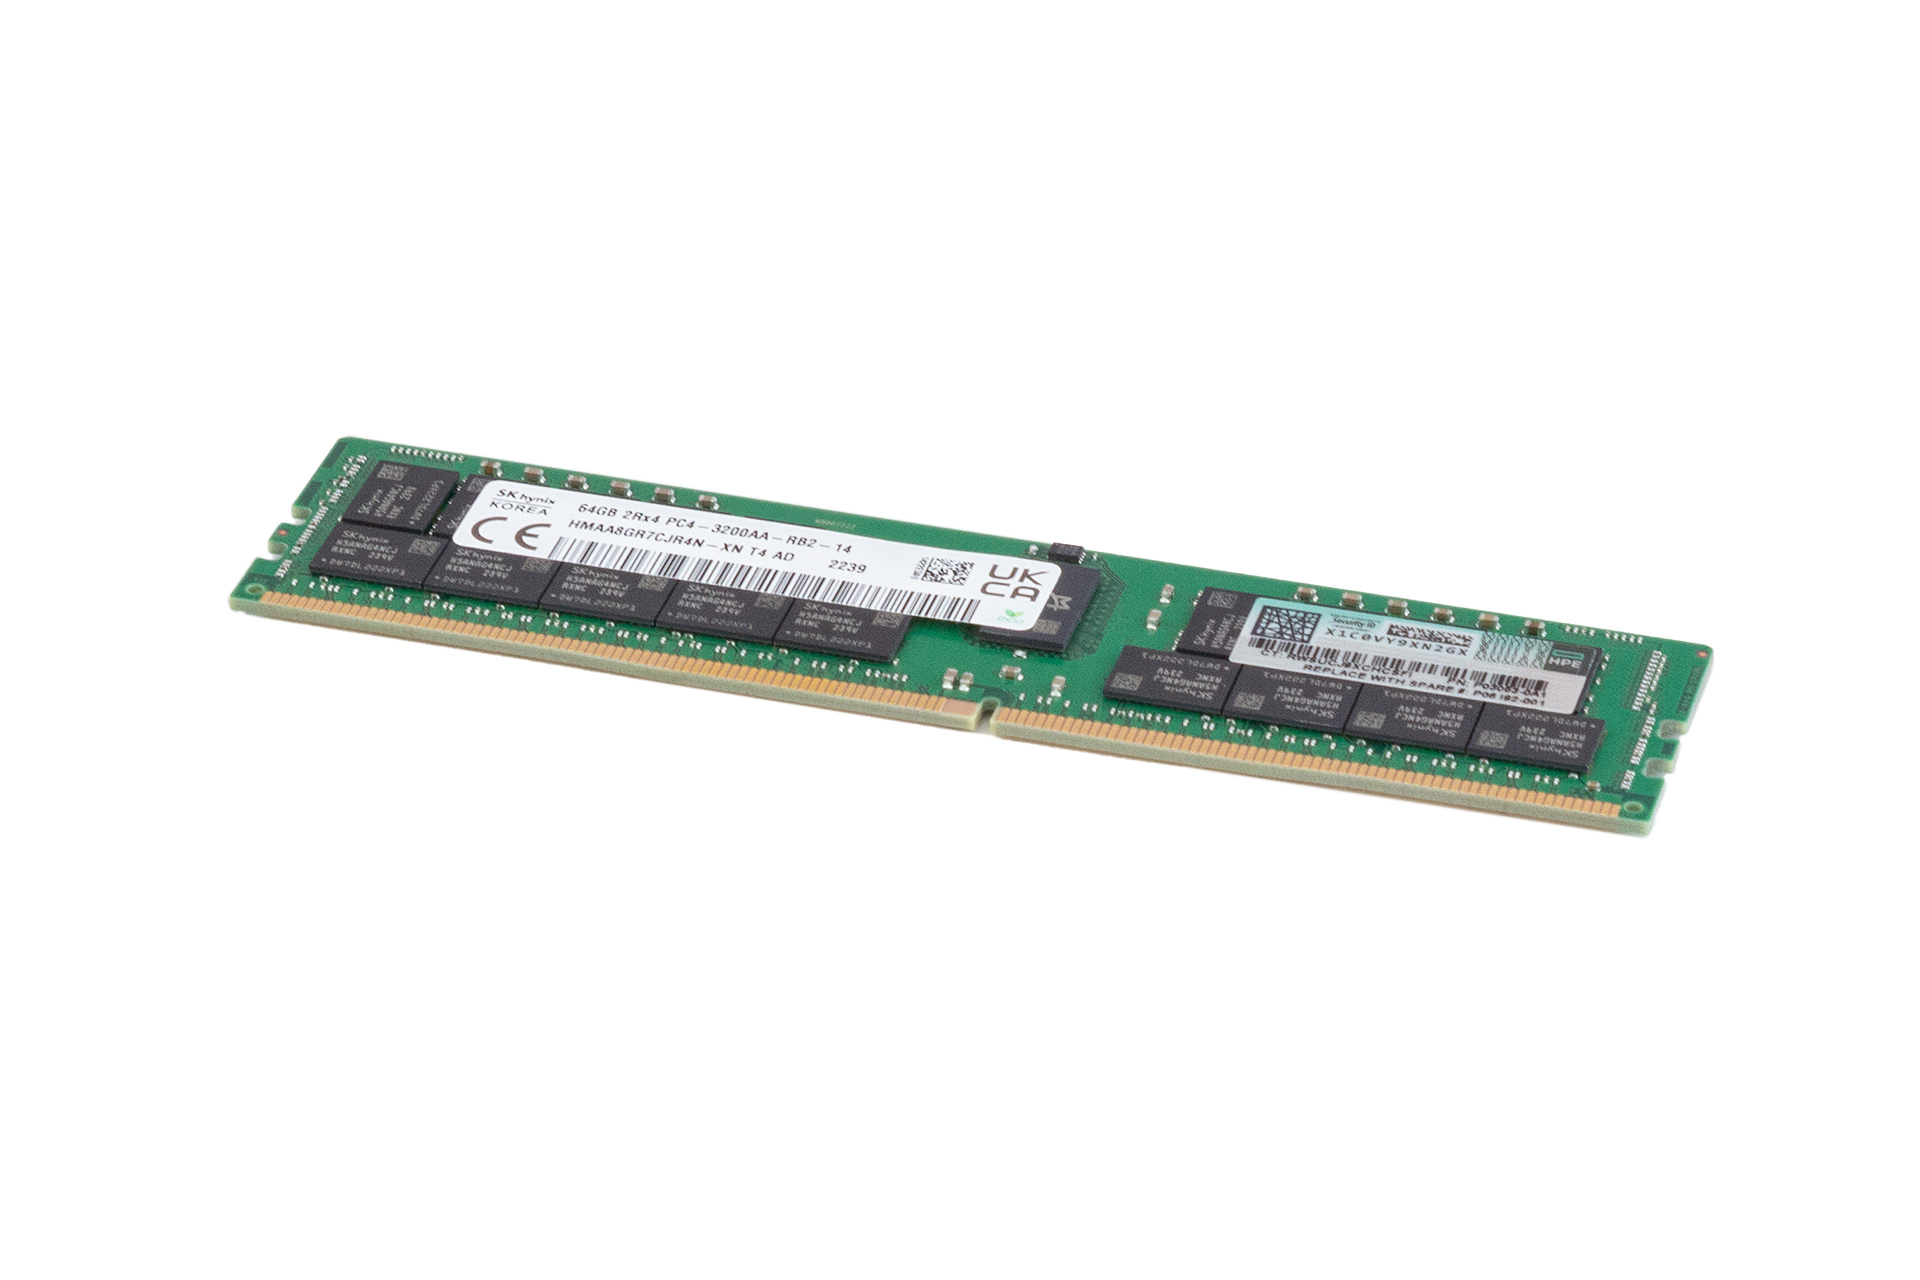 HPE RAM 64GB 2RX4 PC4-2933Y-R (or 3200AA) Smart Memory Kit, P06192-001